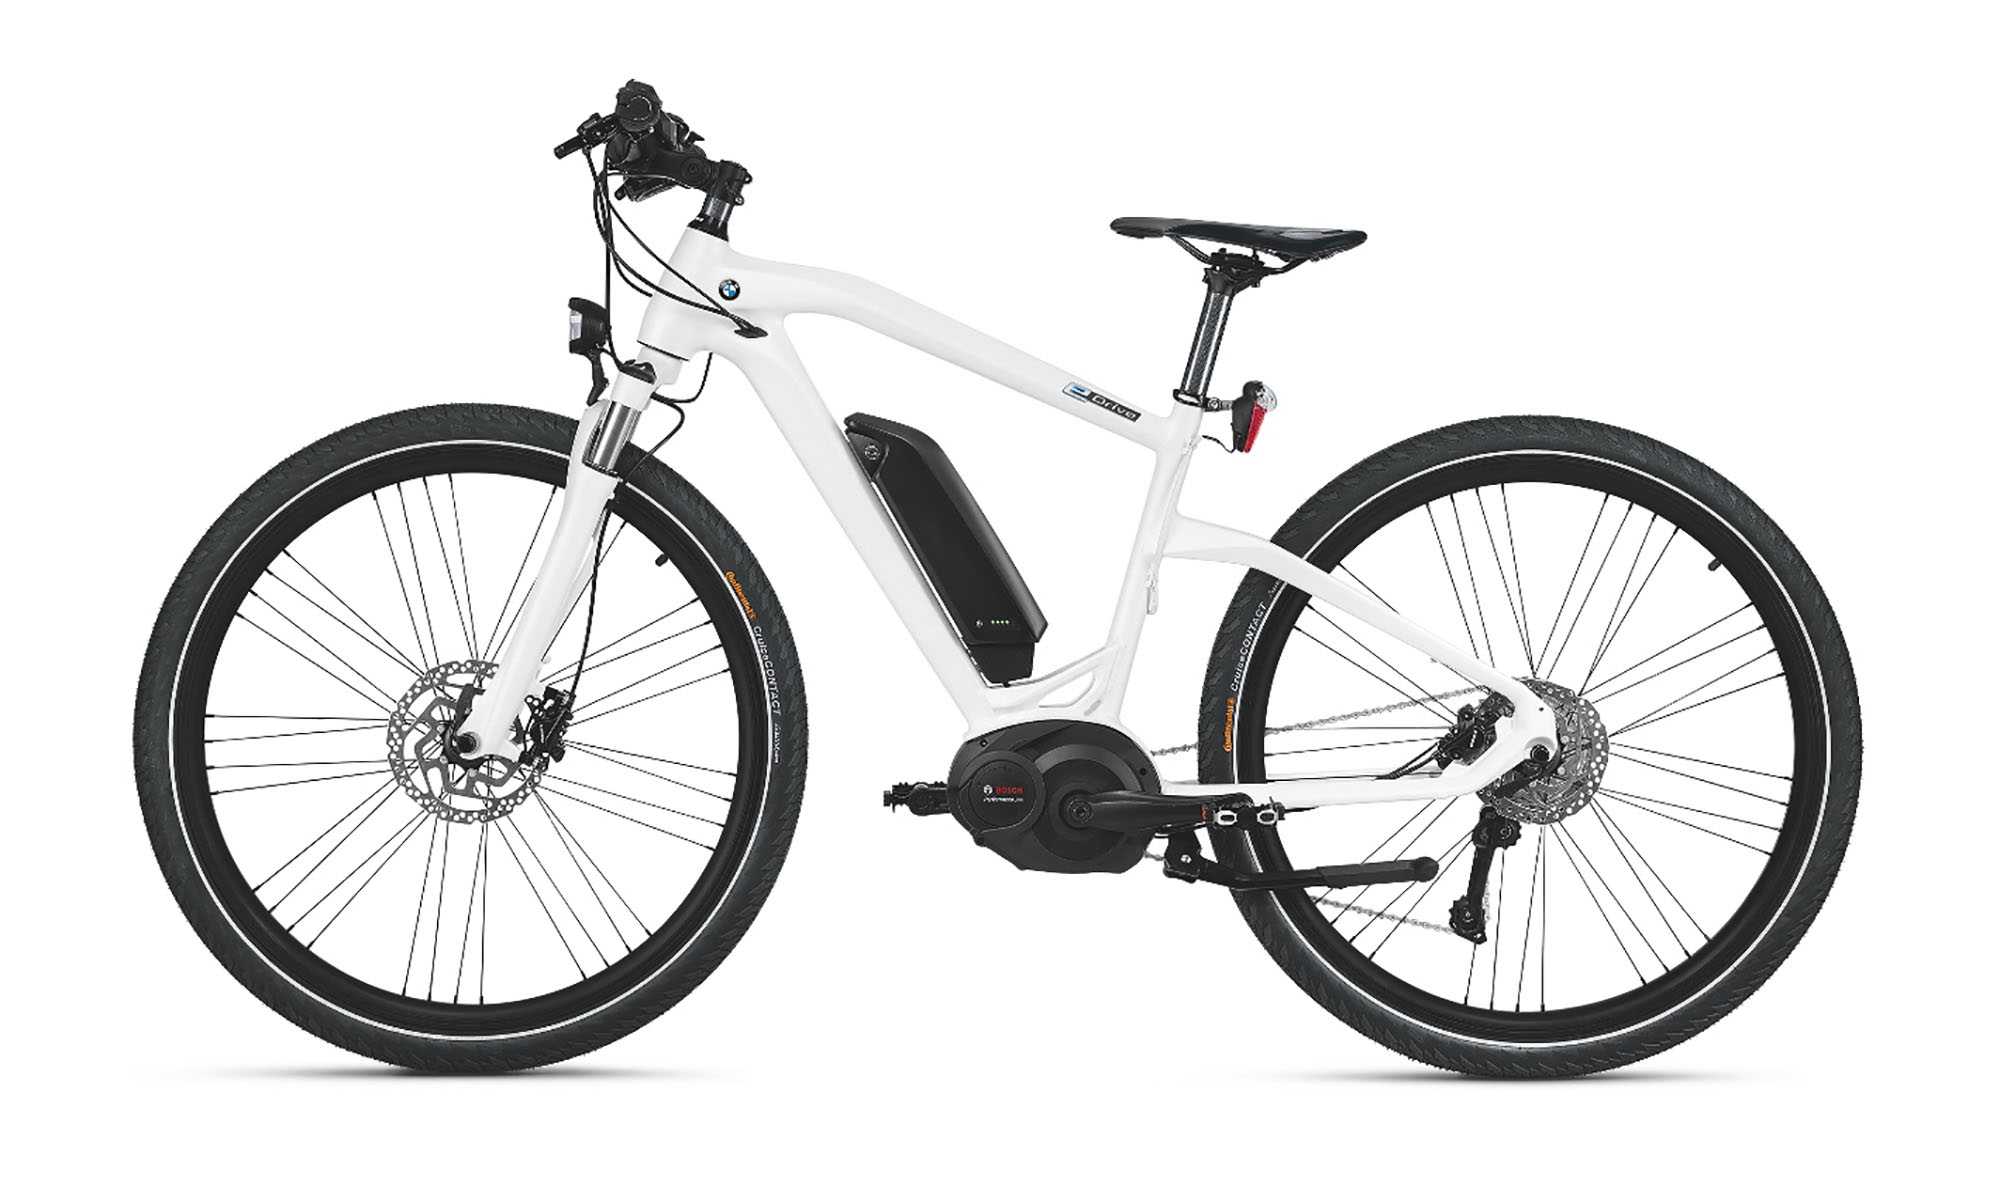 besluiten Goederen Ontleden BMW of North America Presents the New BMW Cruise e-Bike as Part of its 2016  Bicycle Collection.